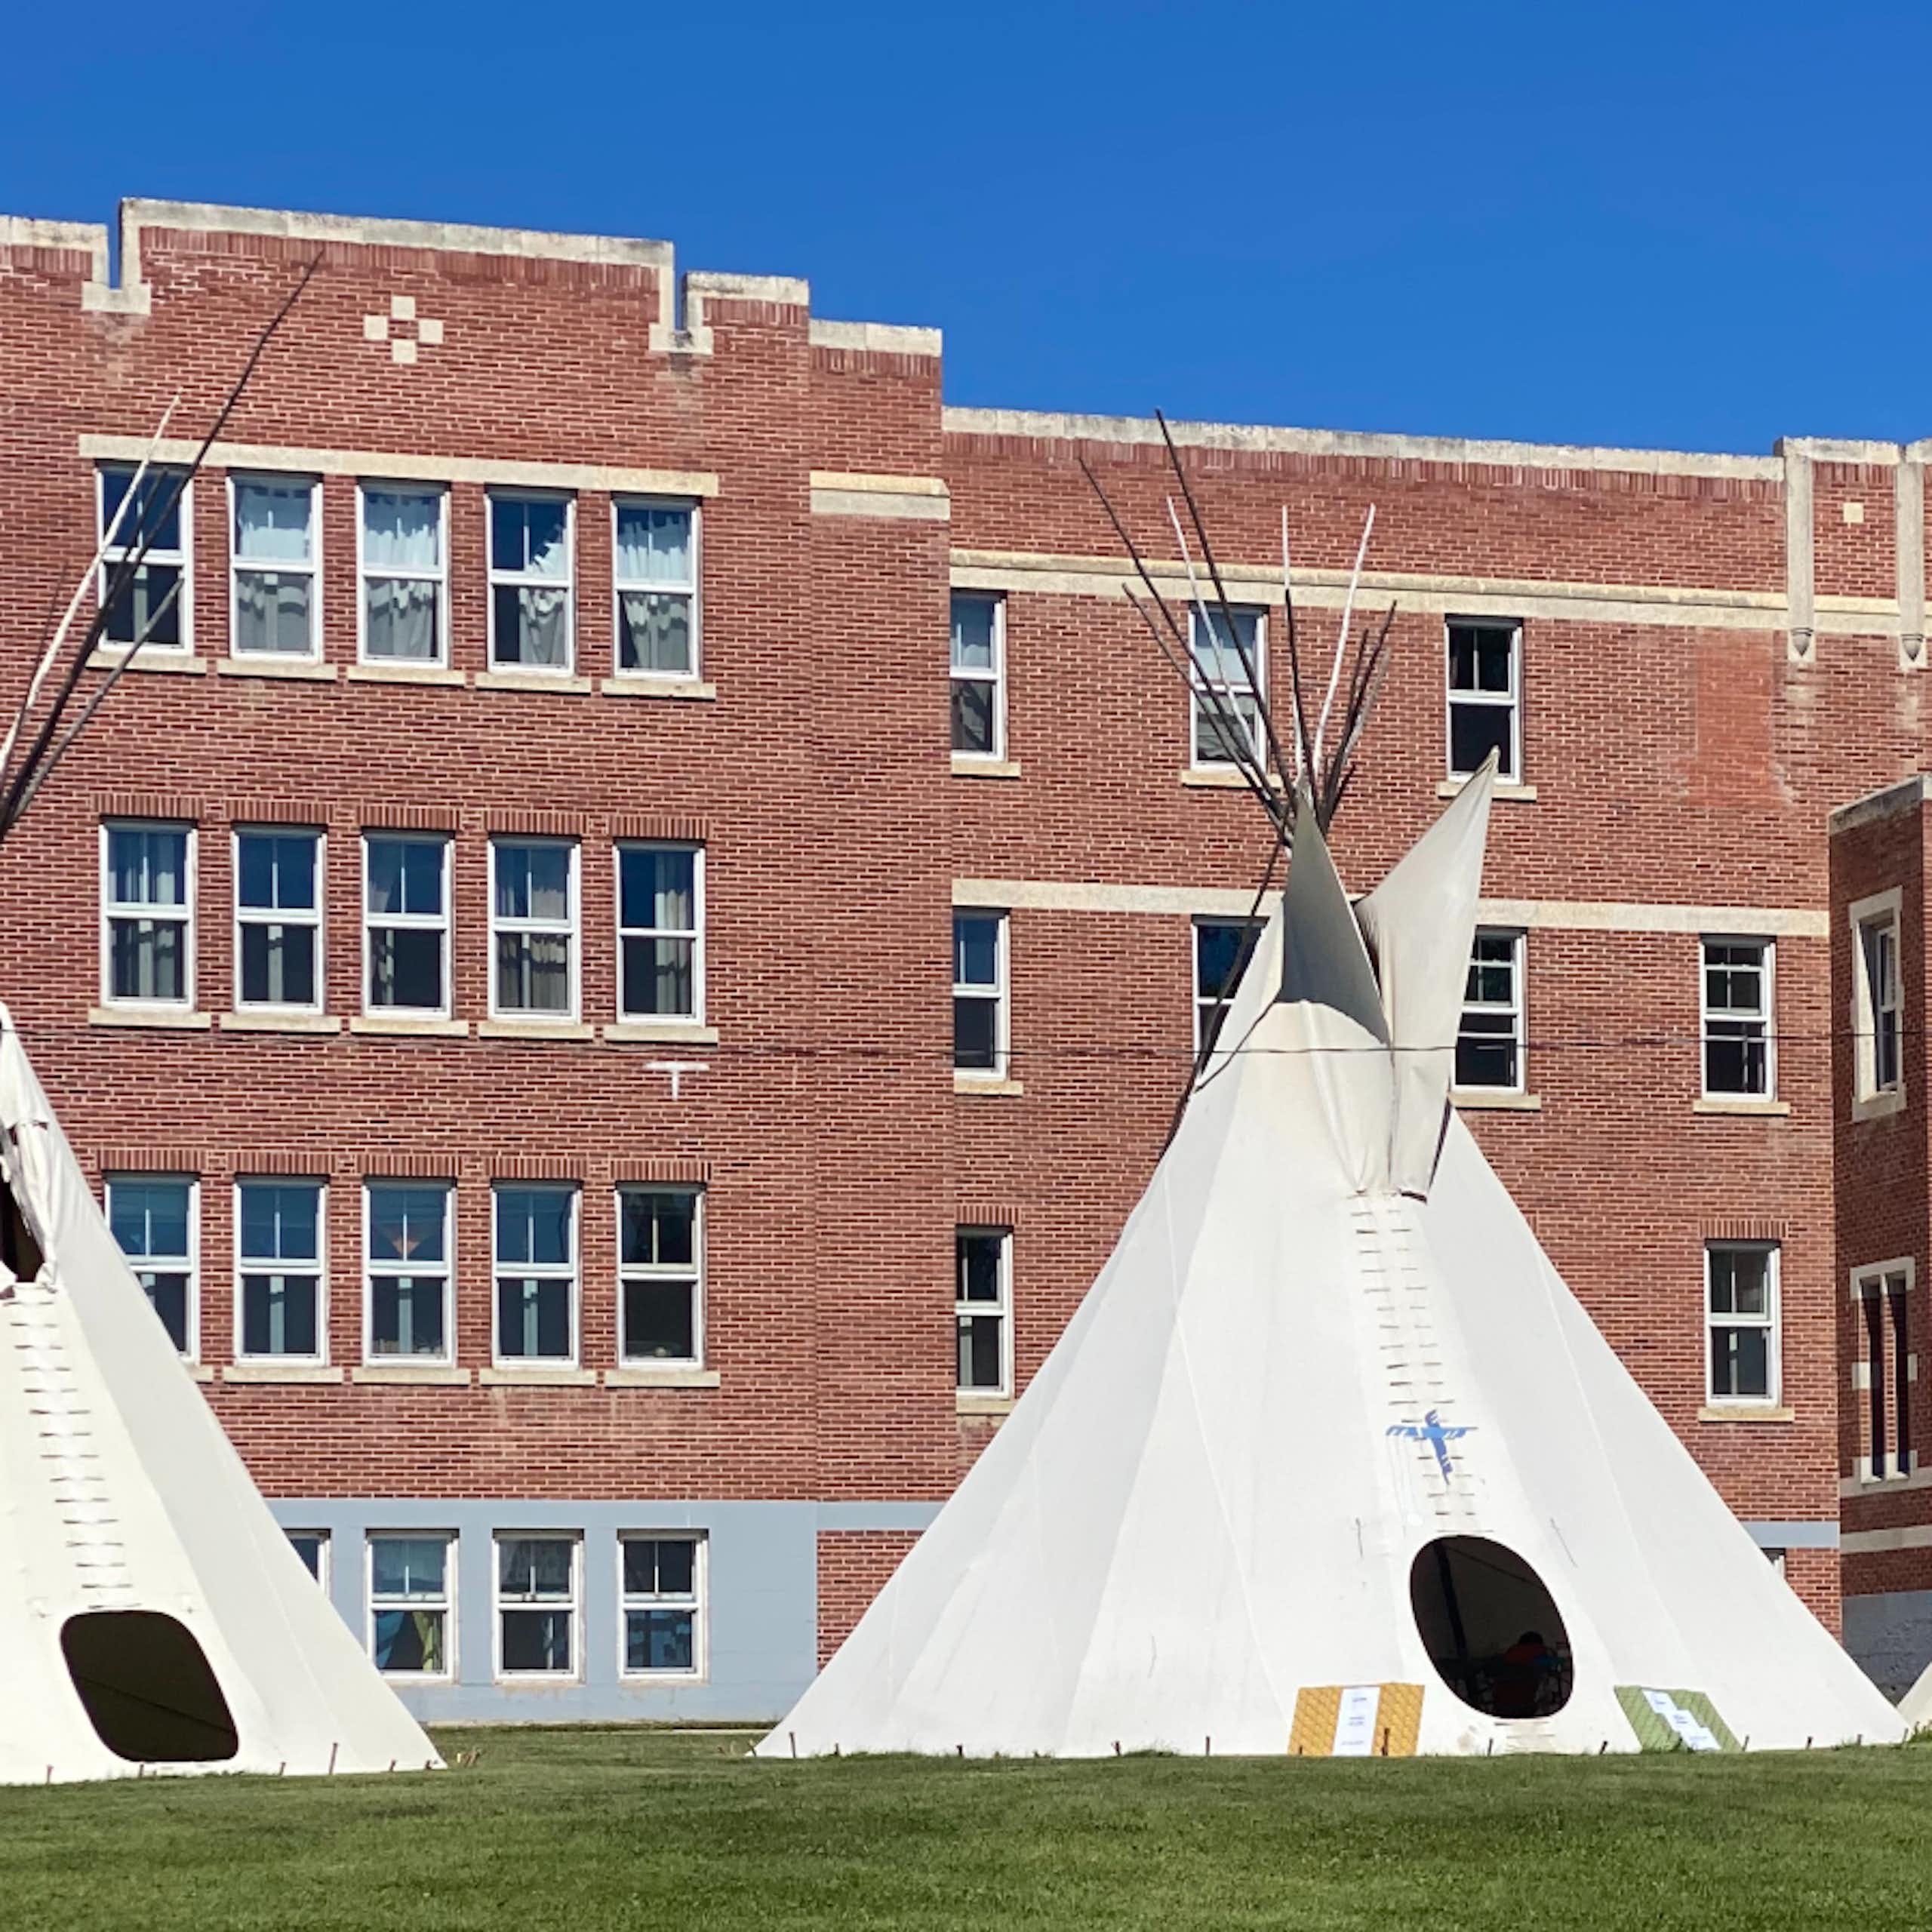 Three white tipis outside a brown stone building